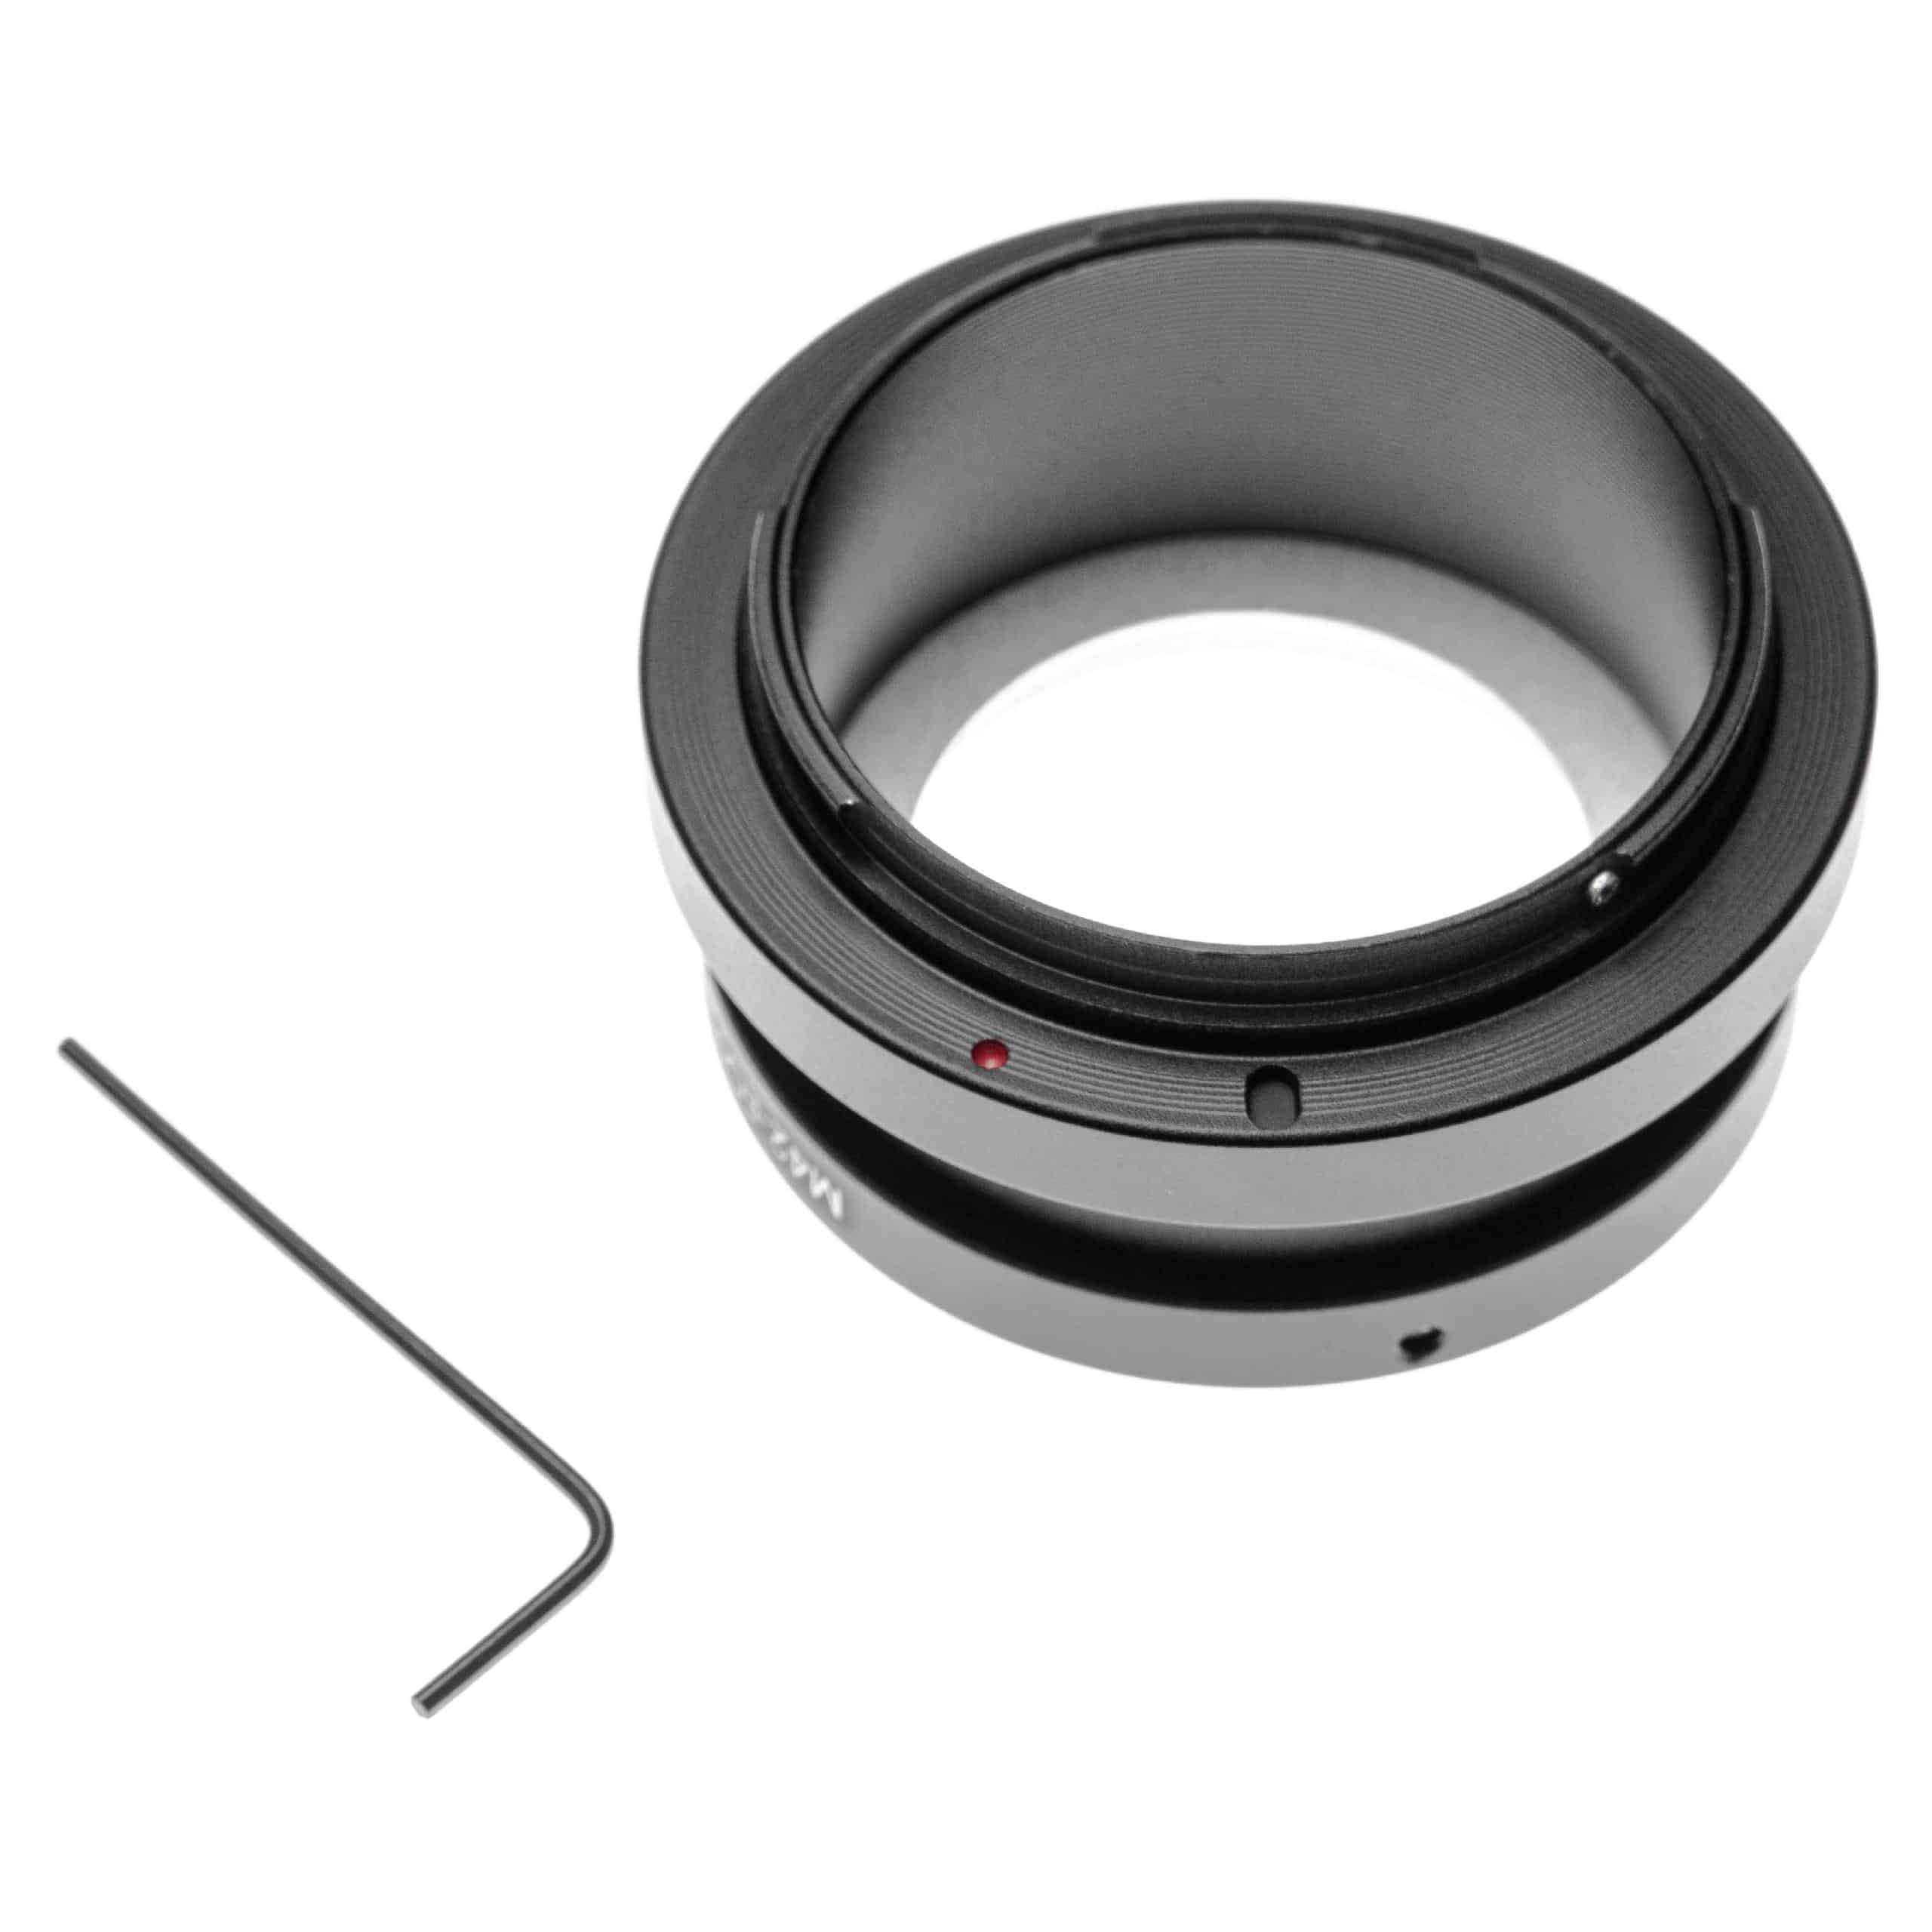 vhbw Adapter Ring compatible with - RF-Bayonet to Lenses with M42 Thread Black Silver